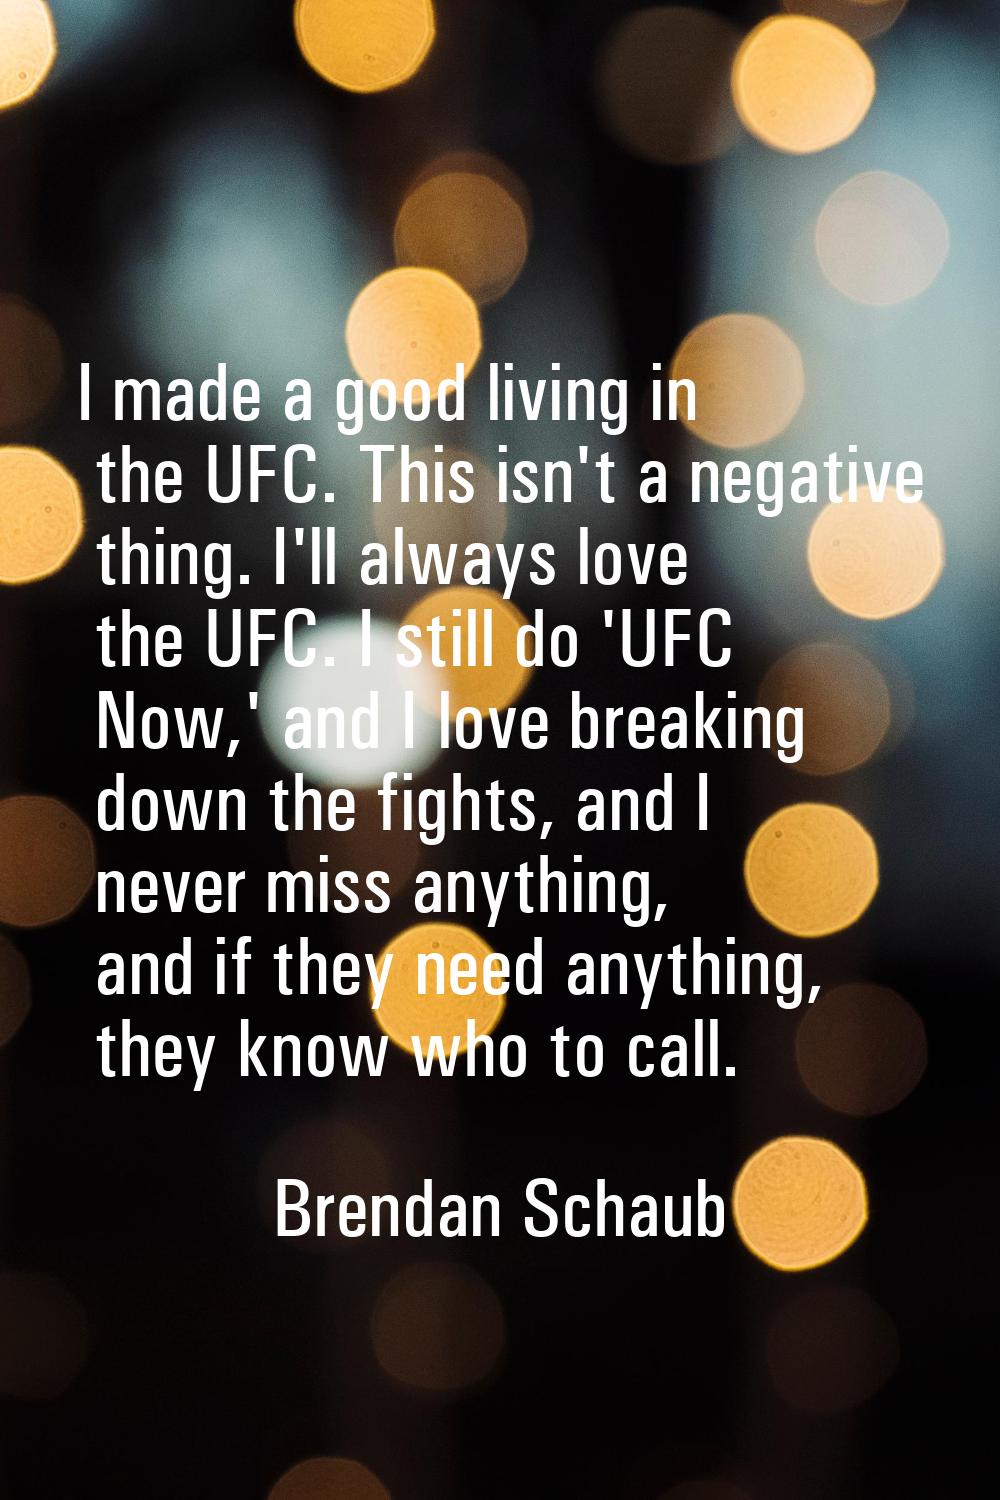 I made a good living in the UFC. This isn't a negative thing. I'll always love the UFC. I still do 